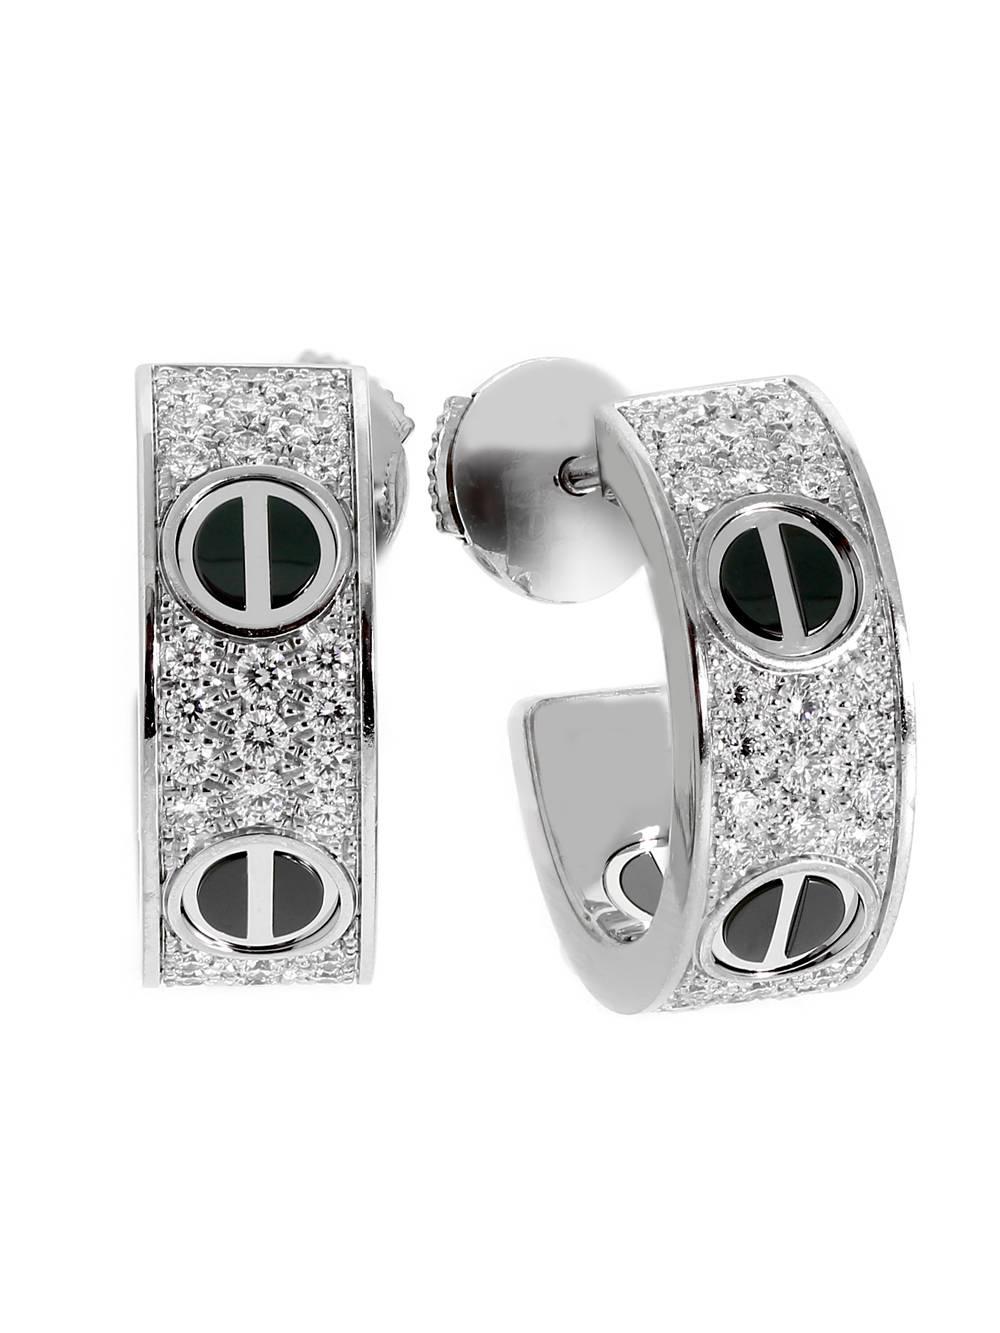 A fabulous pair of Cartier “Love” diamond earrings featuring ceramic screw motifs adorned with 88 of the finest round brilliant cut diamonds in 18k white gold.

Cartier Retail: 16,500 + Tax

Dimension: .62″ in diameter
Width: .25″

Inventory